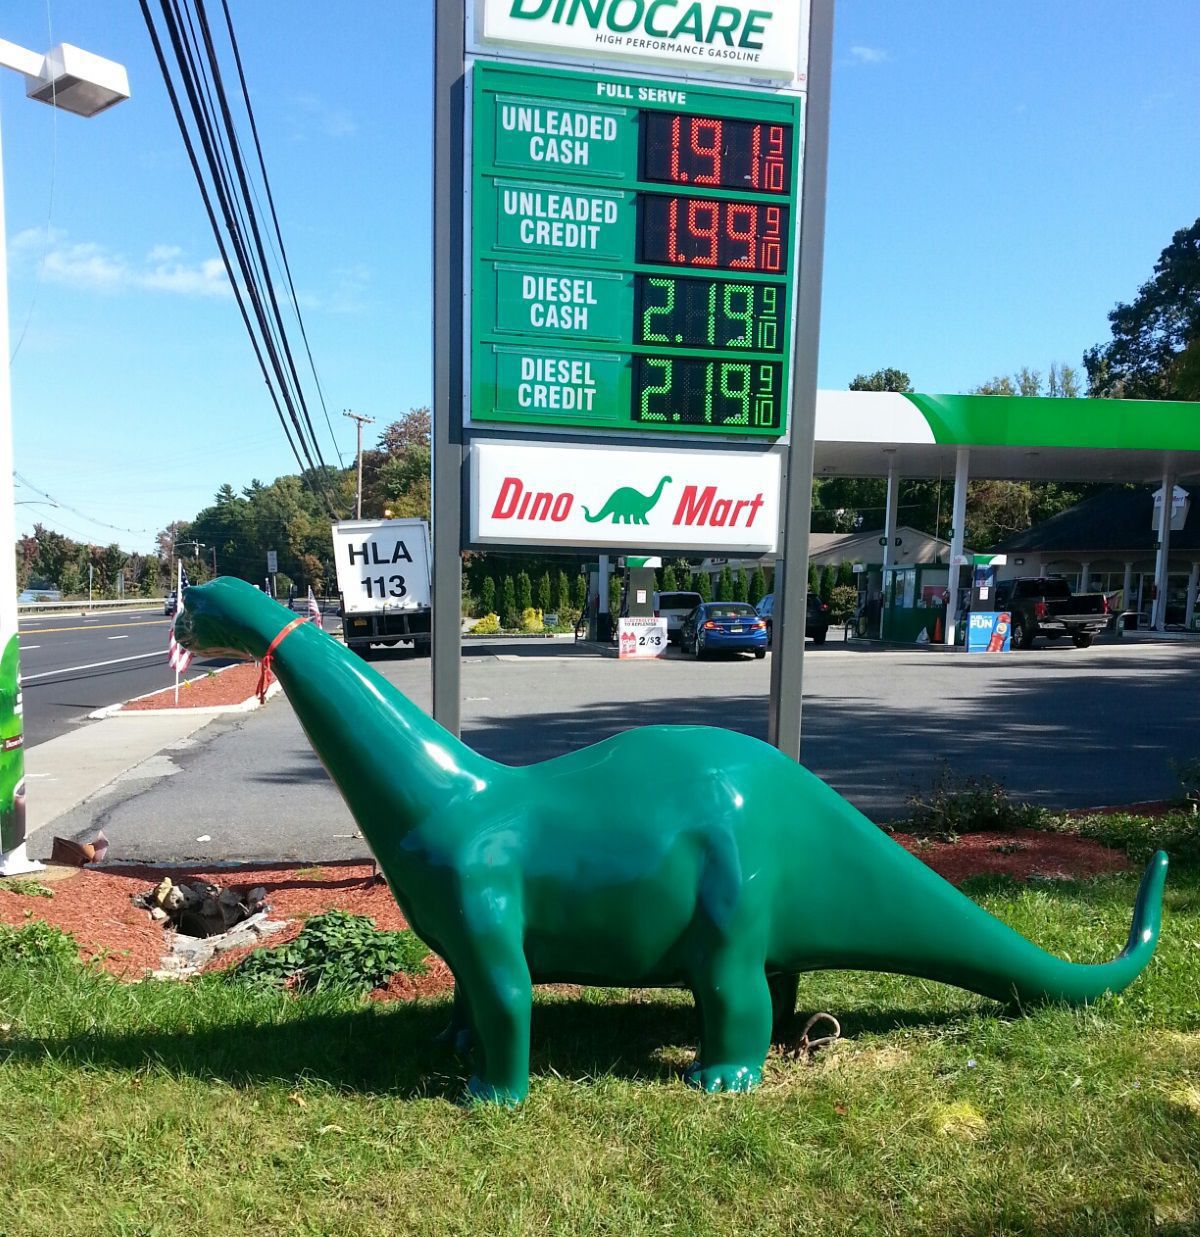 DINO at a Sinclair station